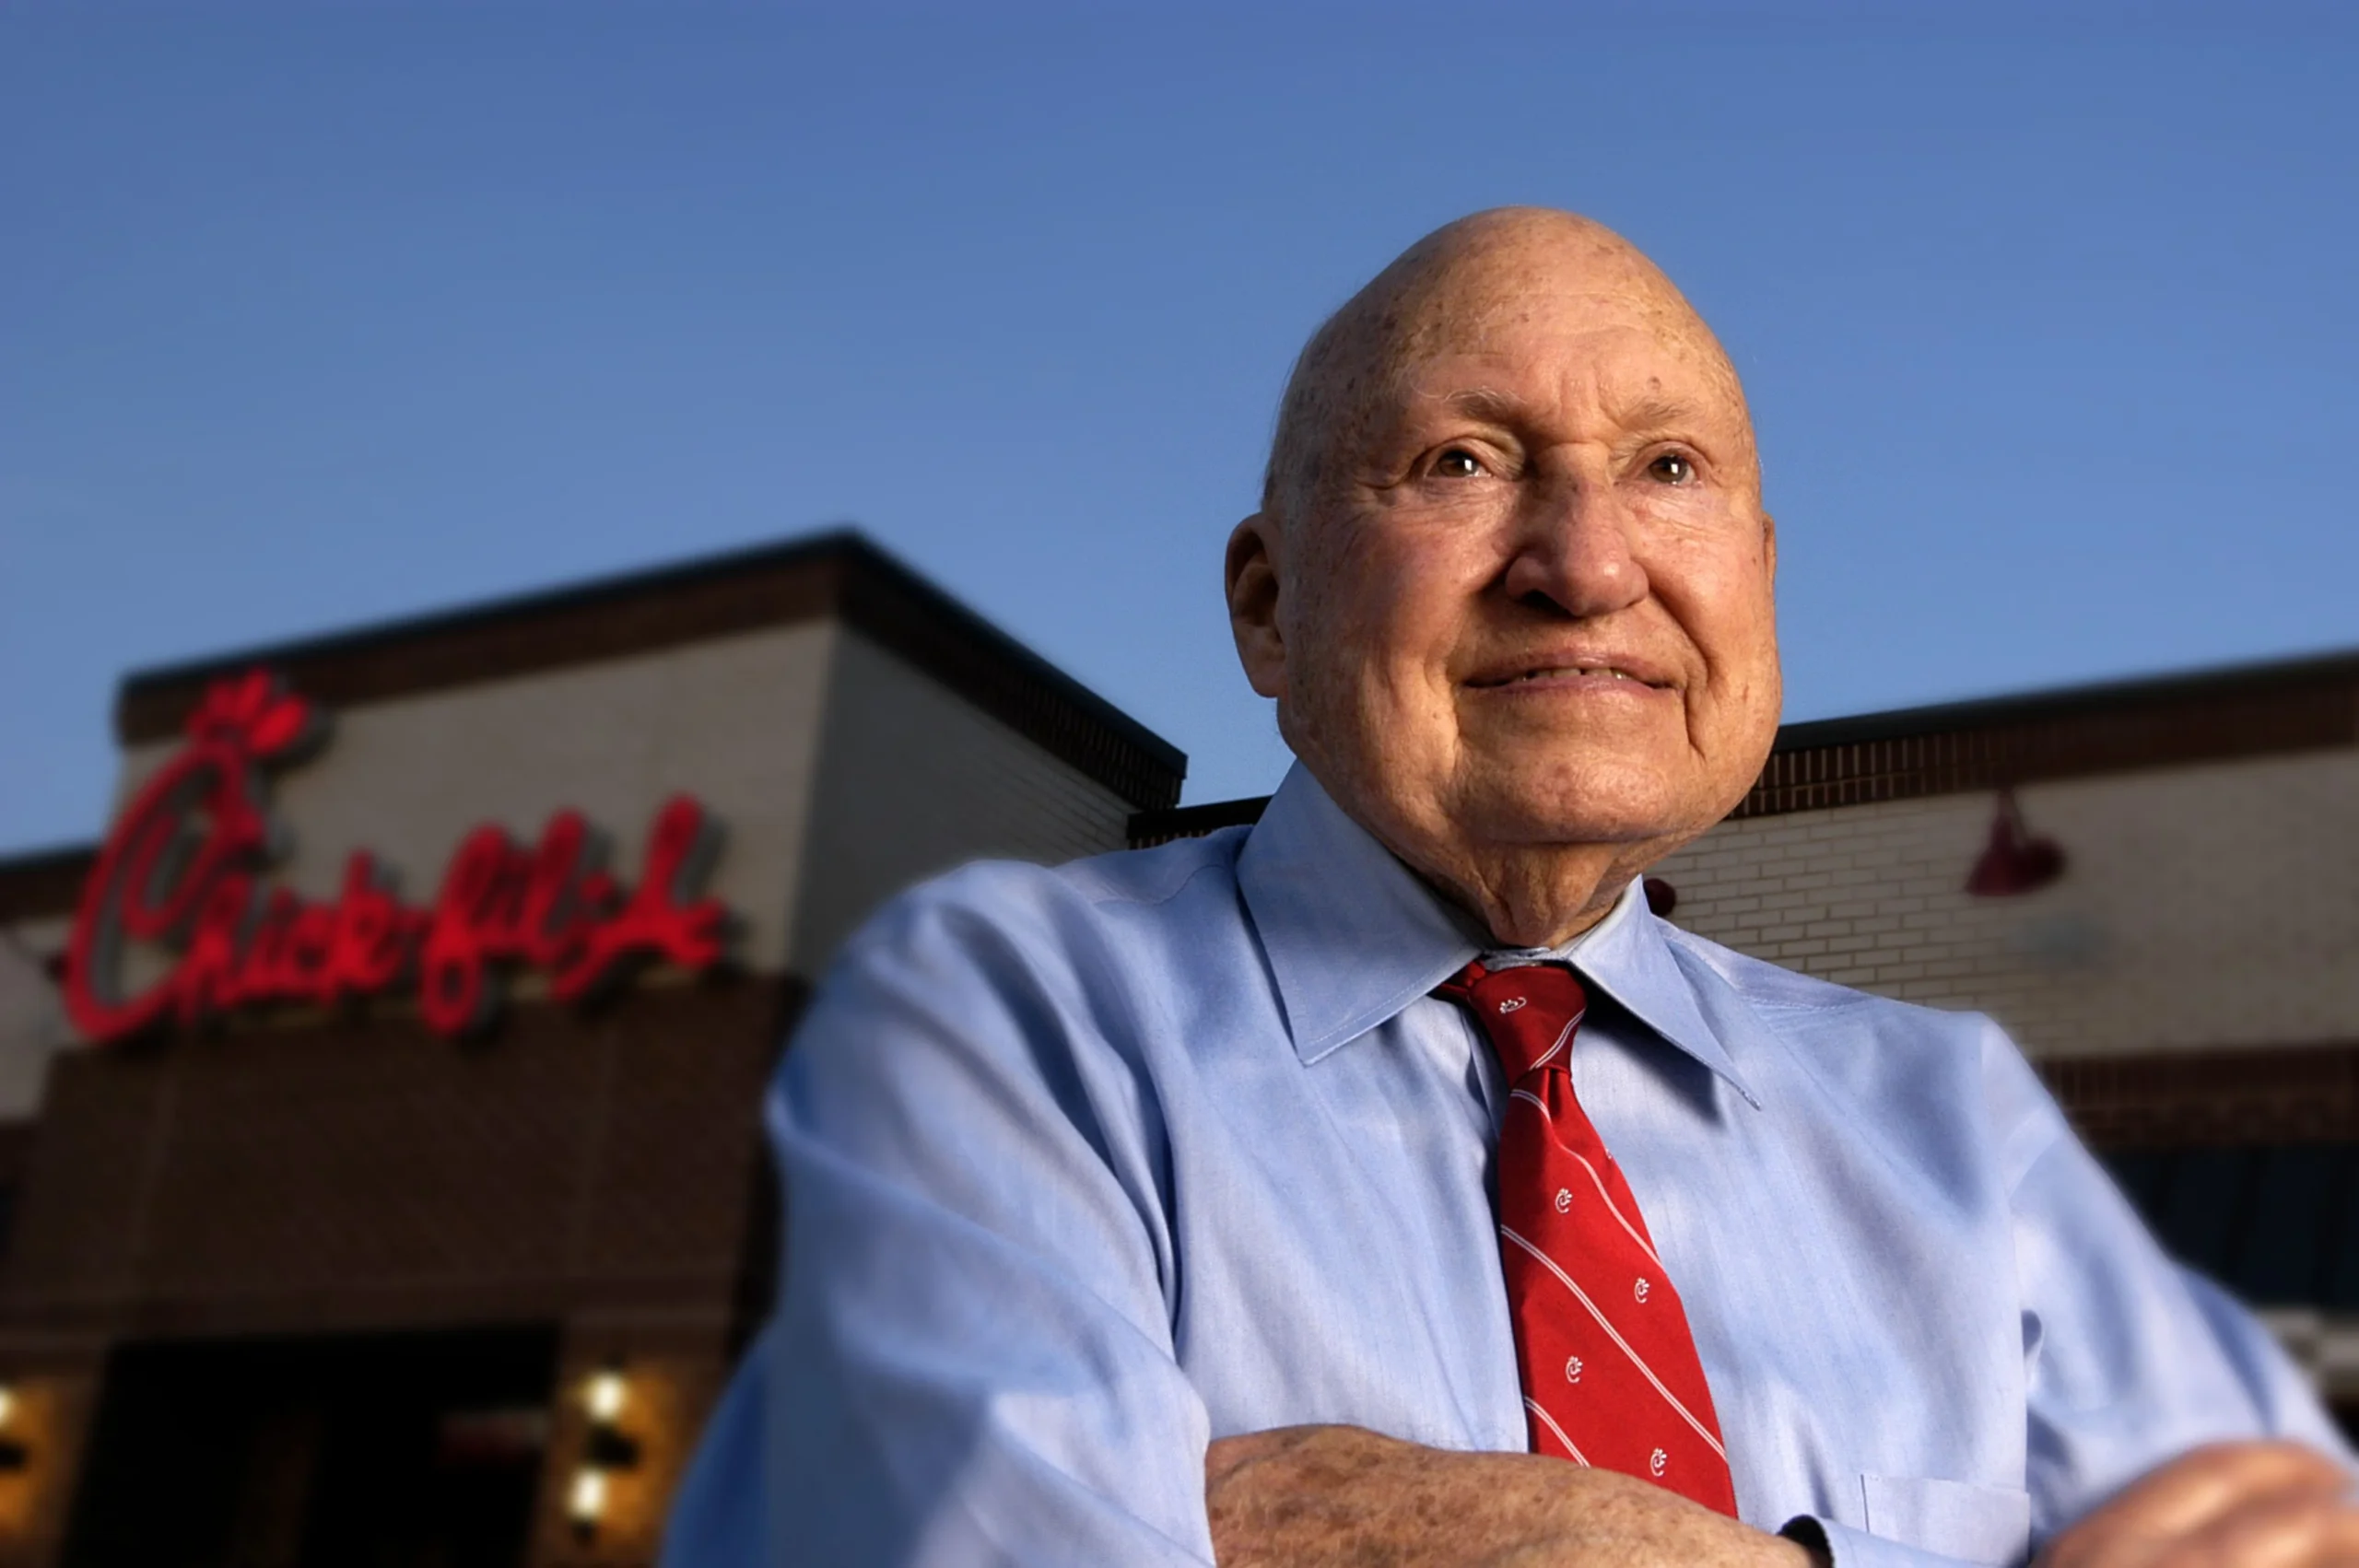 Chick Fil A Owner